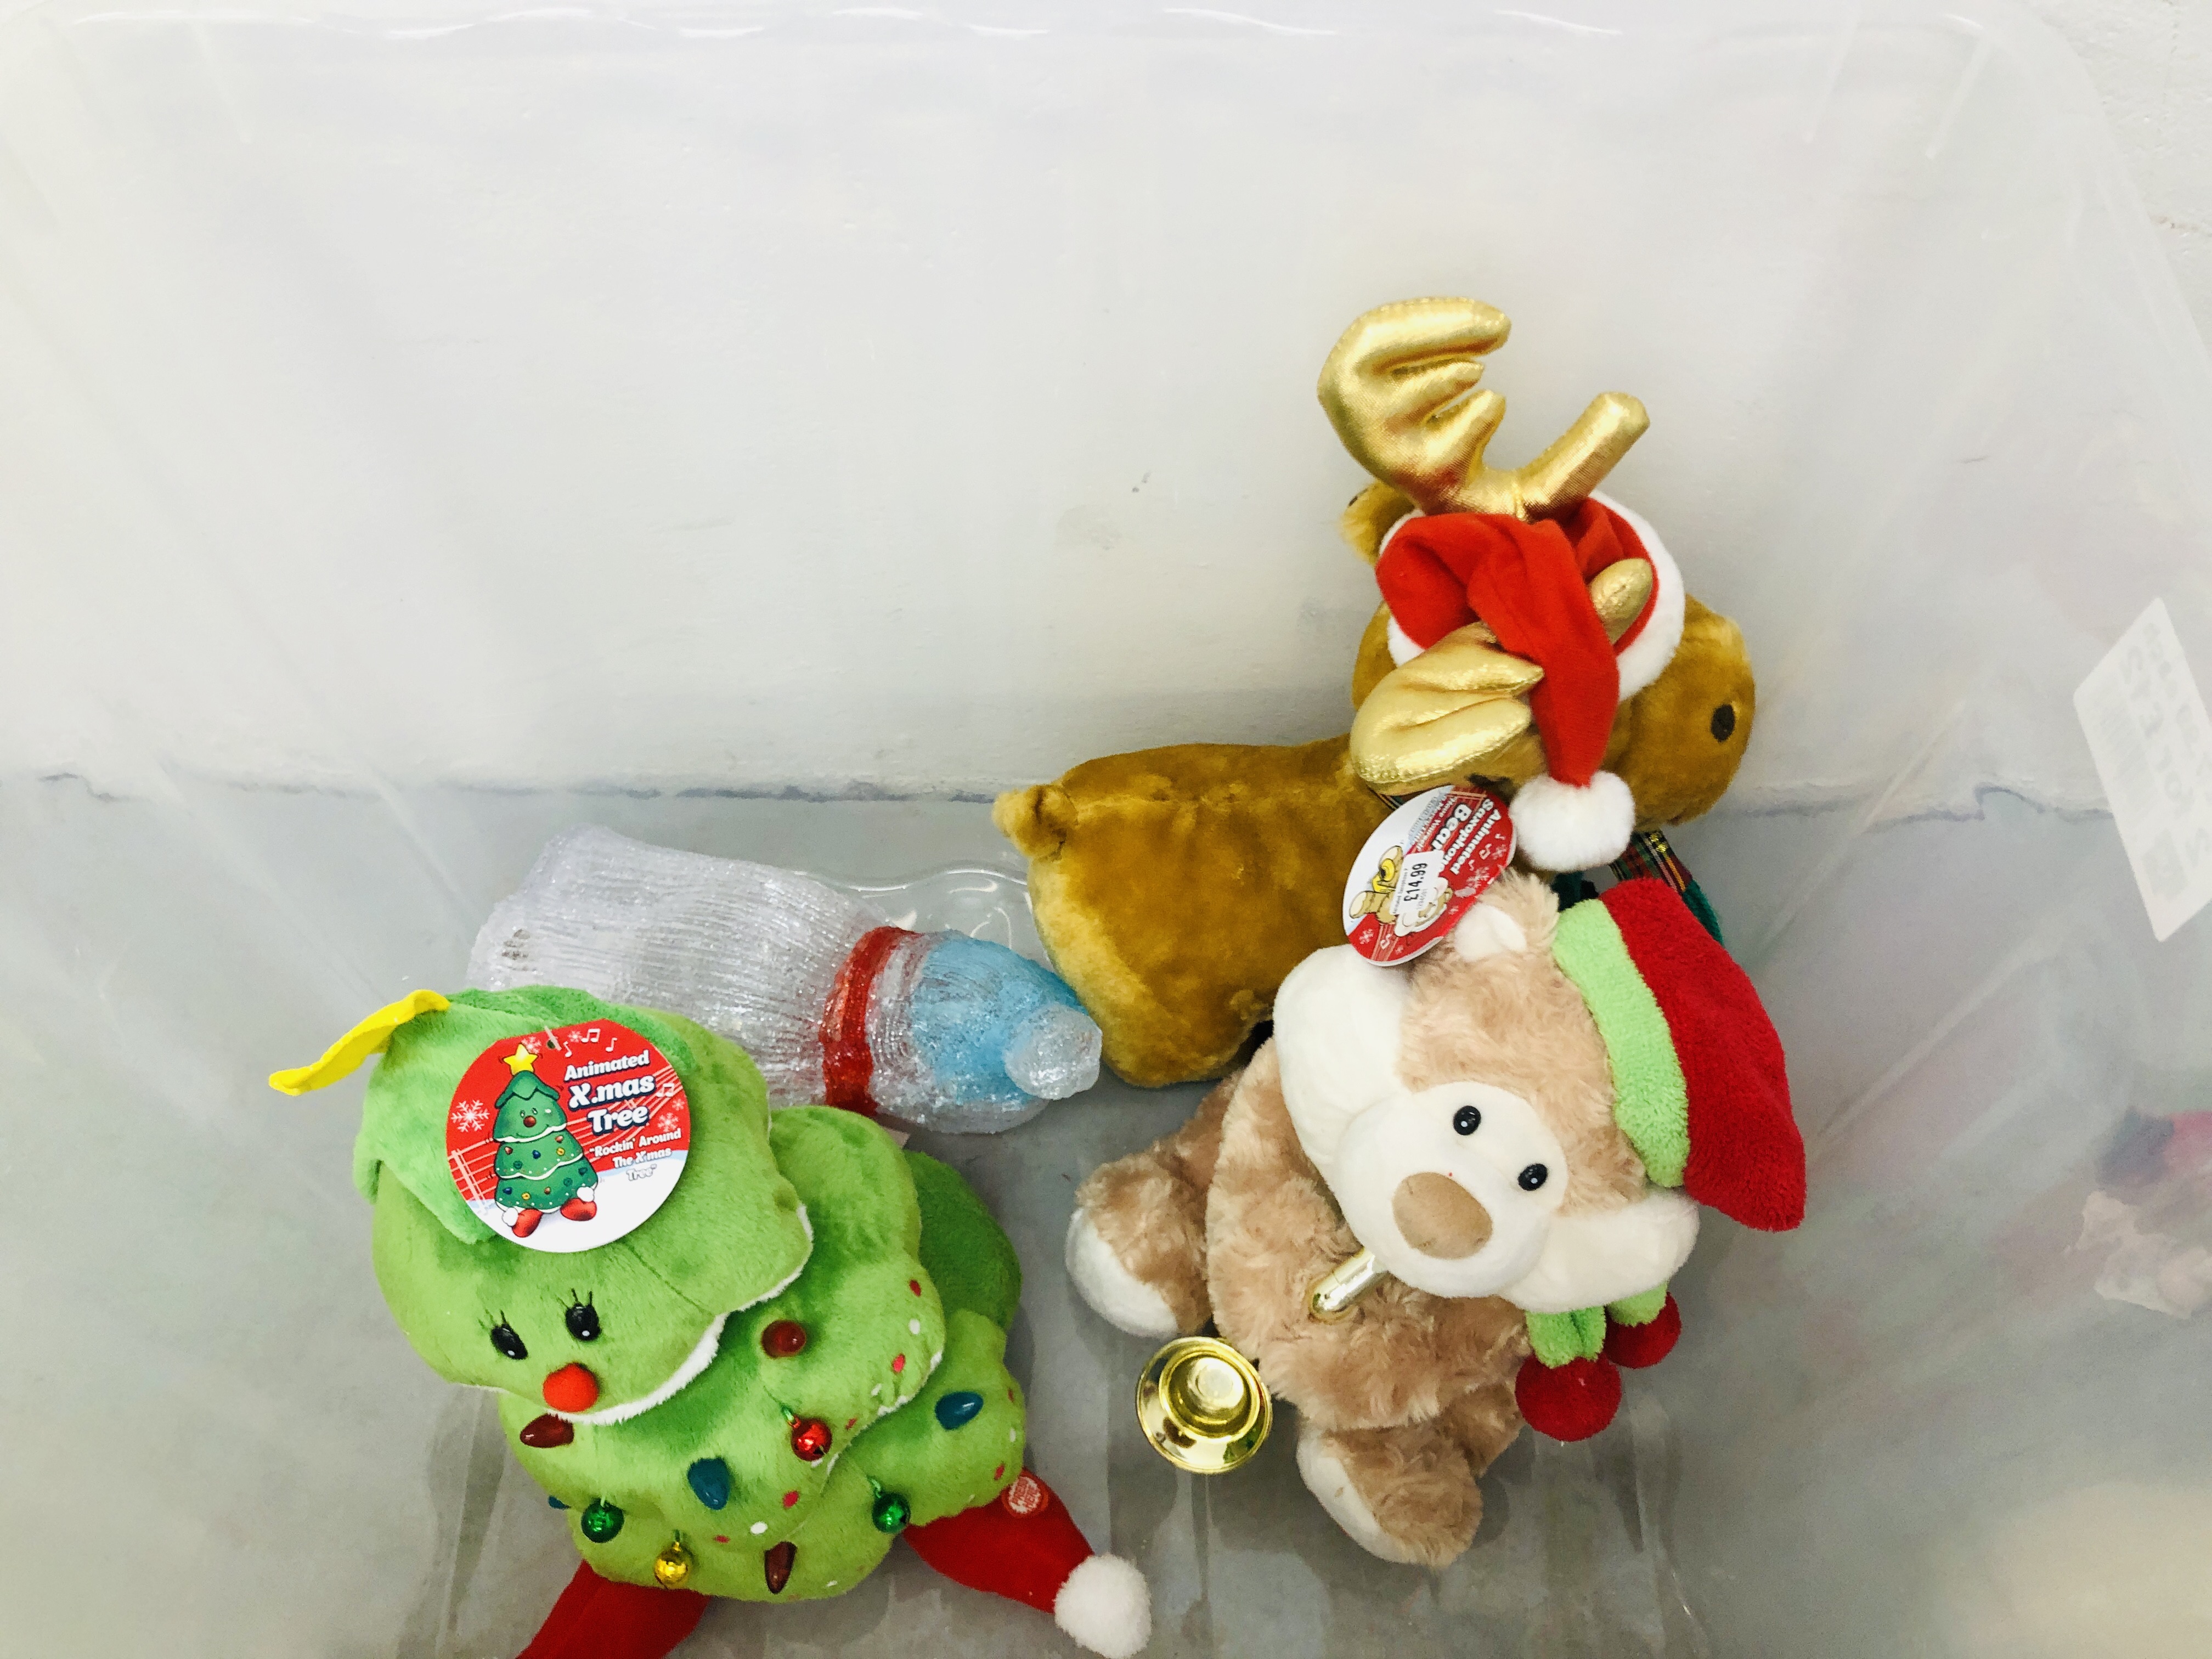 2 LARGE BOXES CONTAINING APPROXIMATELY 30 SOFT CHRISTMAS CHARACTERS, - Image 8 of 8